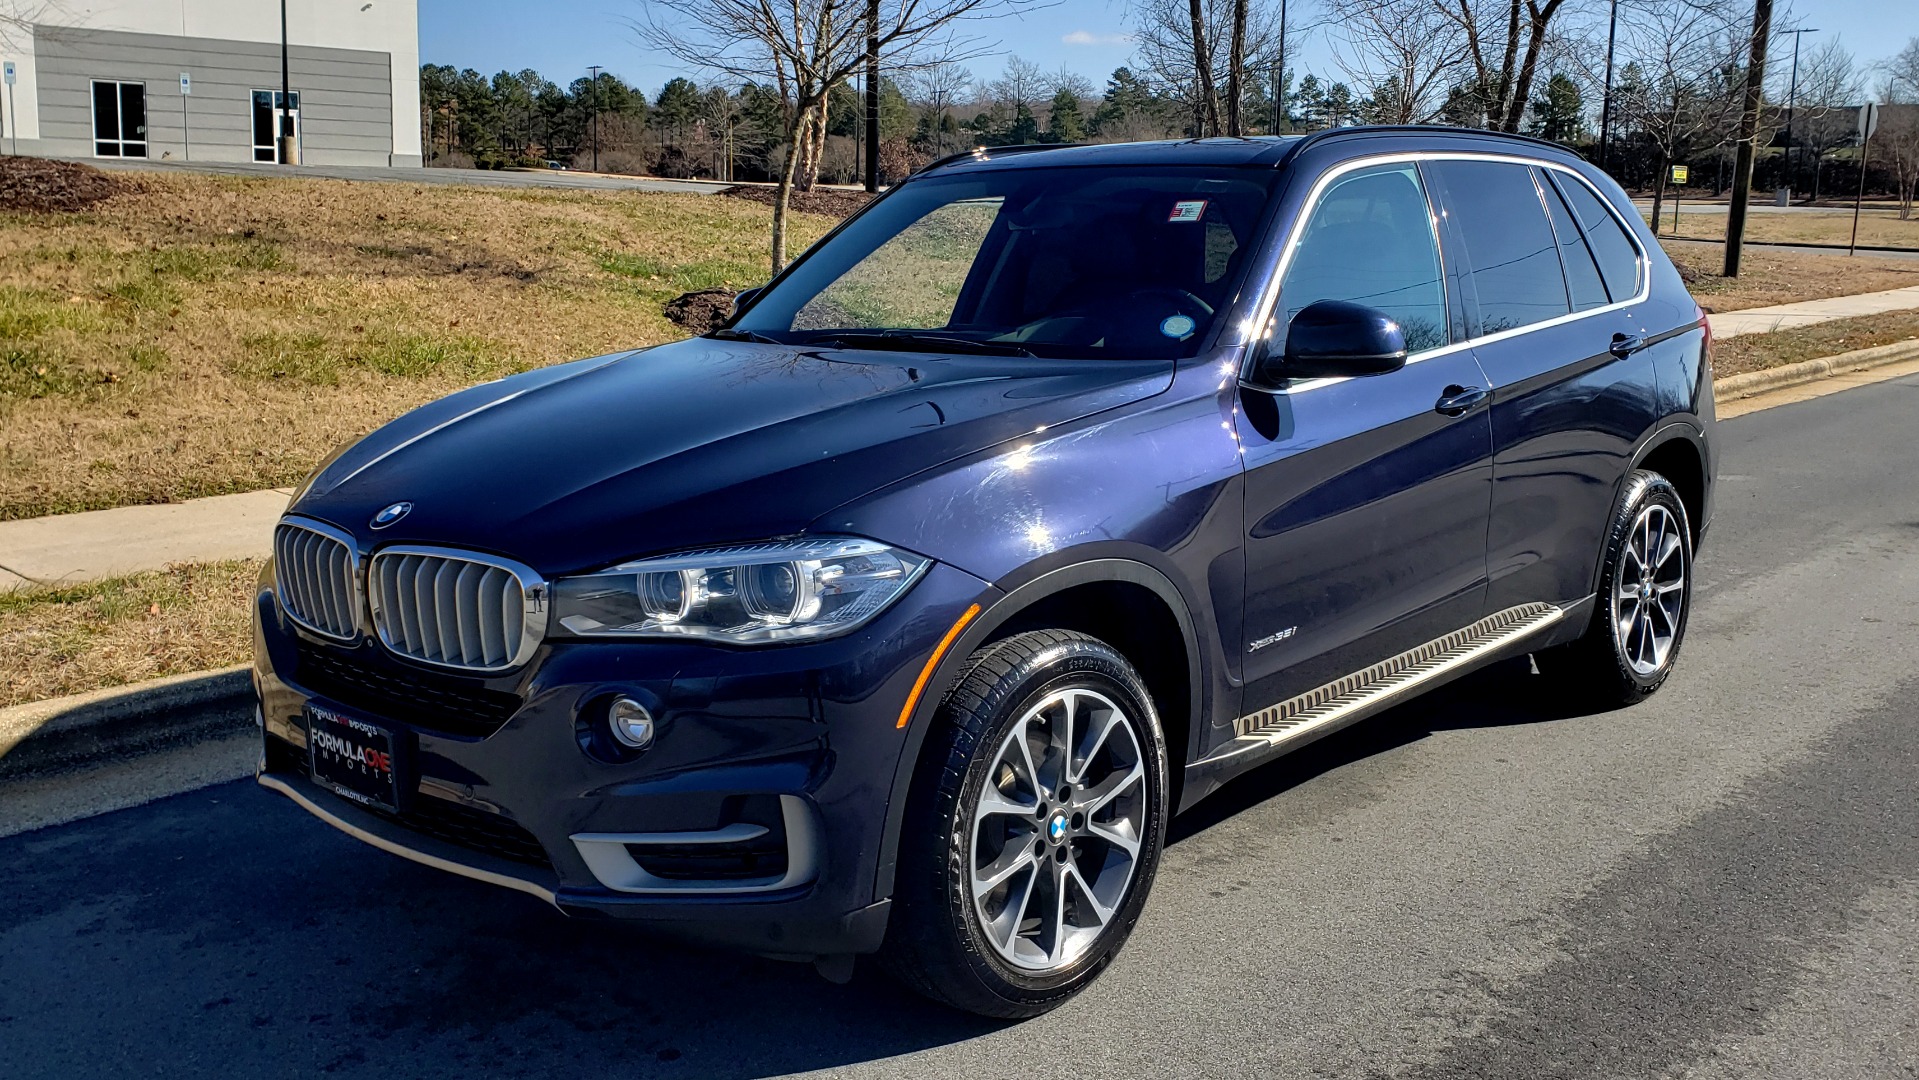 Used 2015 BMW X5 XDRIVE35I PREMIUM / NAV / XLINE / CLD WTHR / DRVR ASST / REARVIEW for sale Sold at Formula Imports in Charlotte NC 28227 1